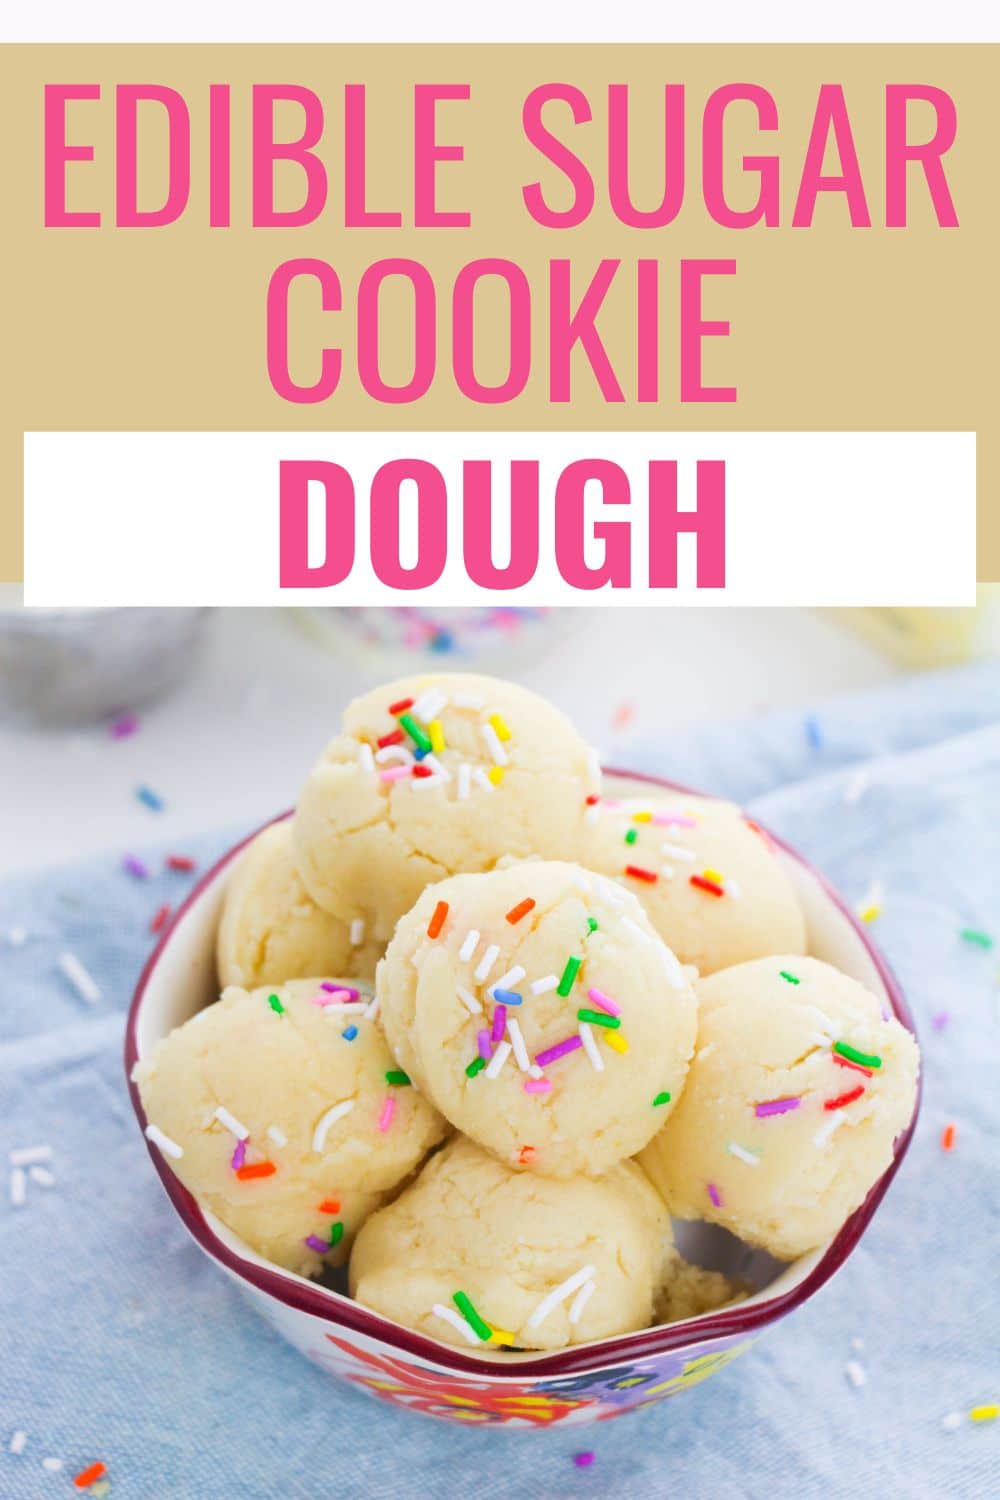 This Edible Sugar Cookie Dough is a safe-to-eat cookie dough perfect for satisfying your sweet tooth! It can be customized to your liking. #ediblesugarcookiedough #ediblecookiedough #cookiedough #sugarcookie via @wondermomwannab